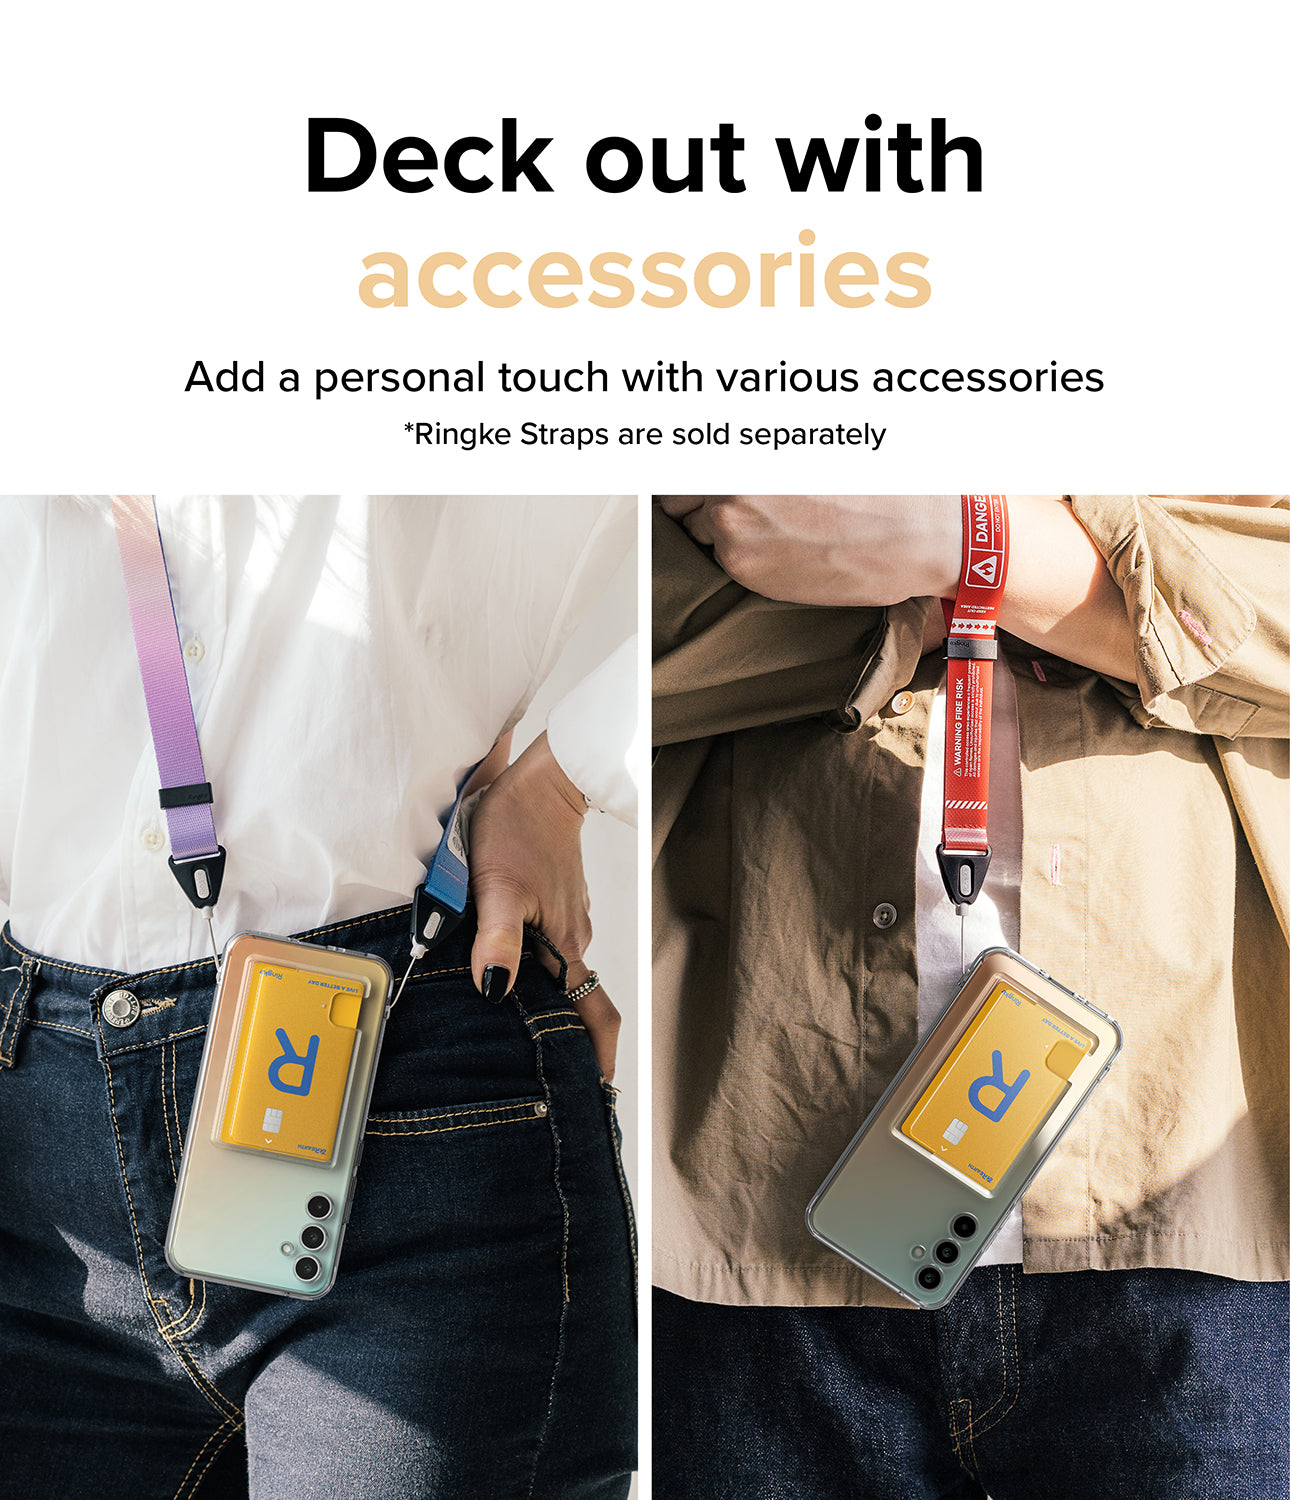 Add a personal touch with various accessories with lanyard holes.